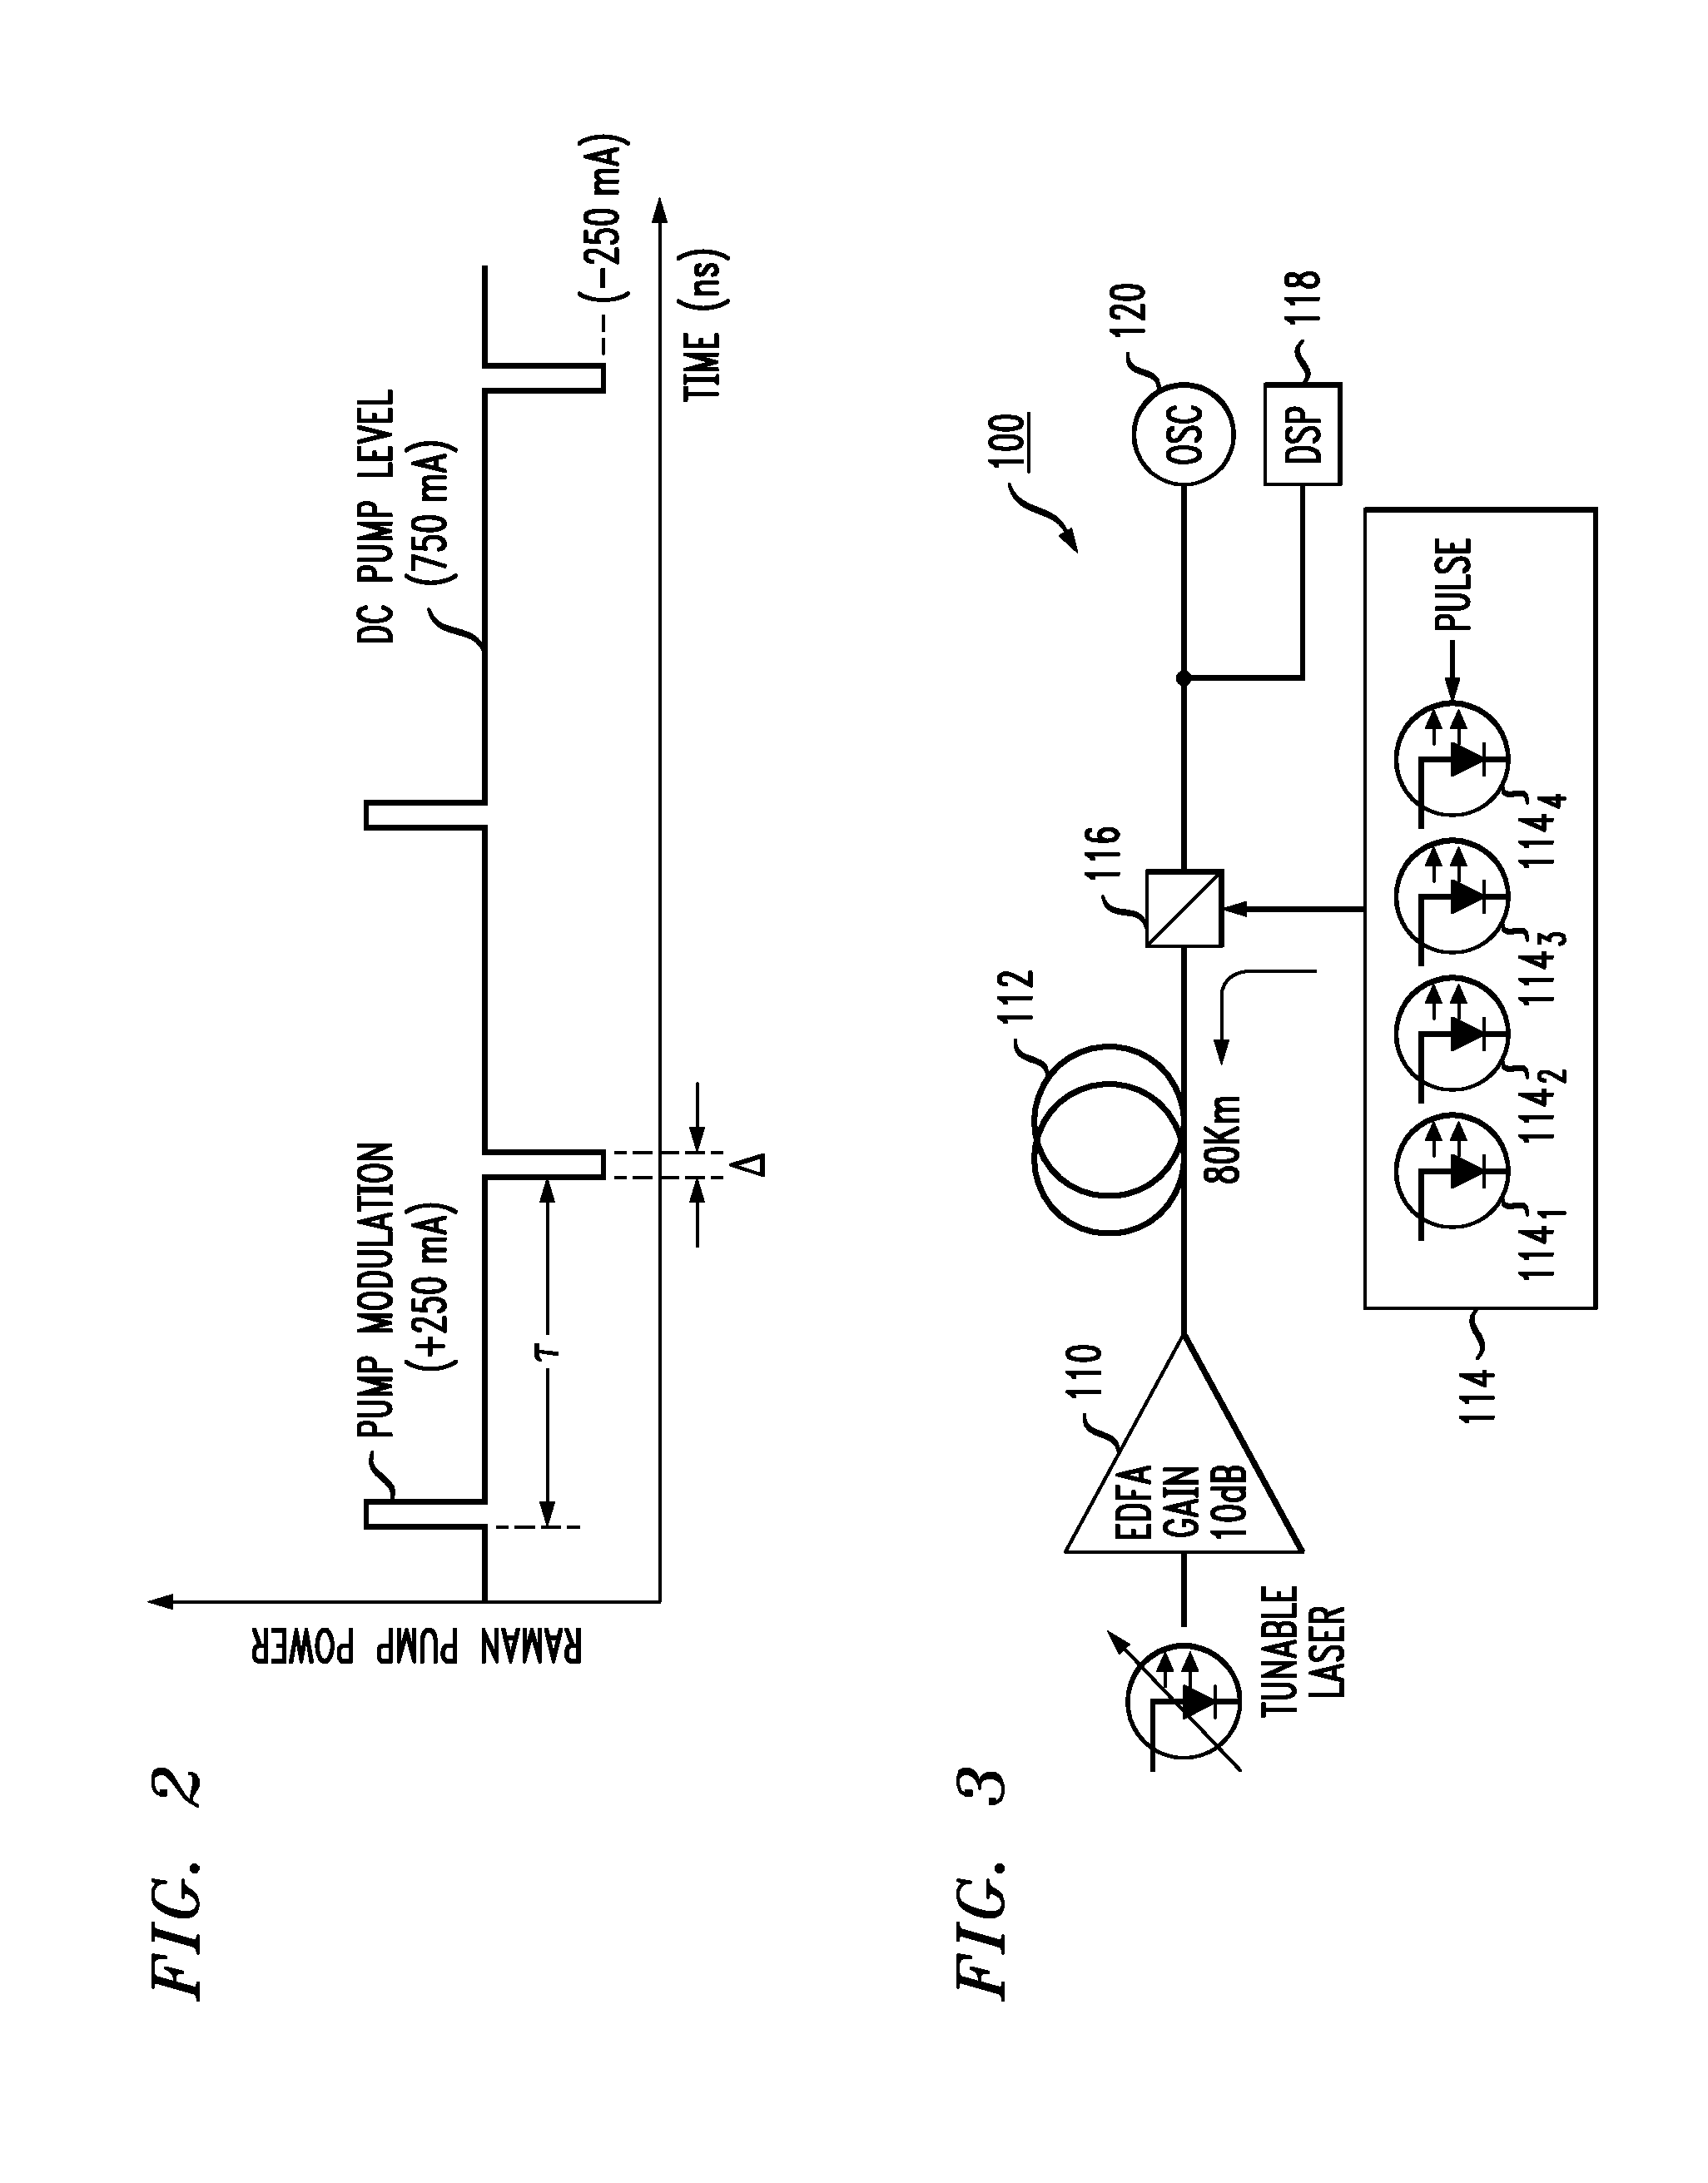 In-Service Optical Time Domain Reflectometry Utilizing Raman Pump Source